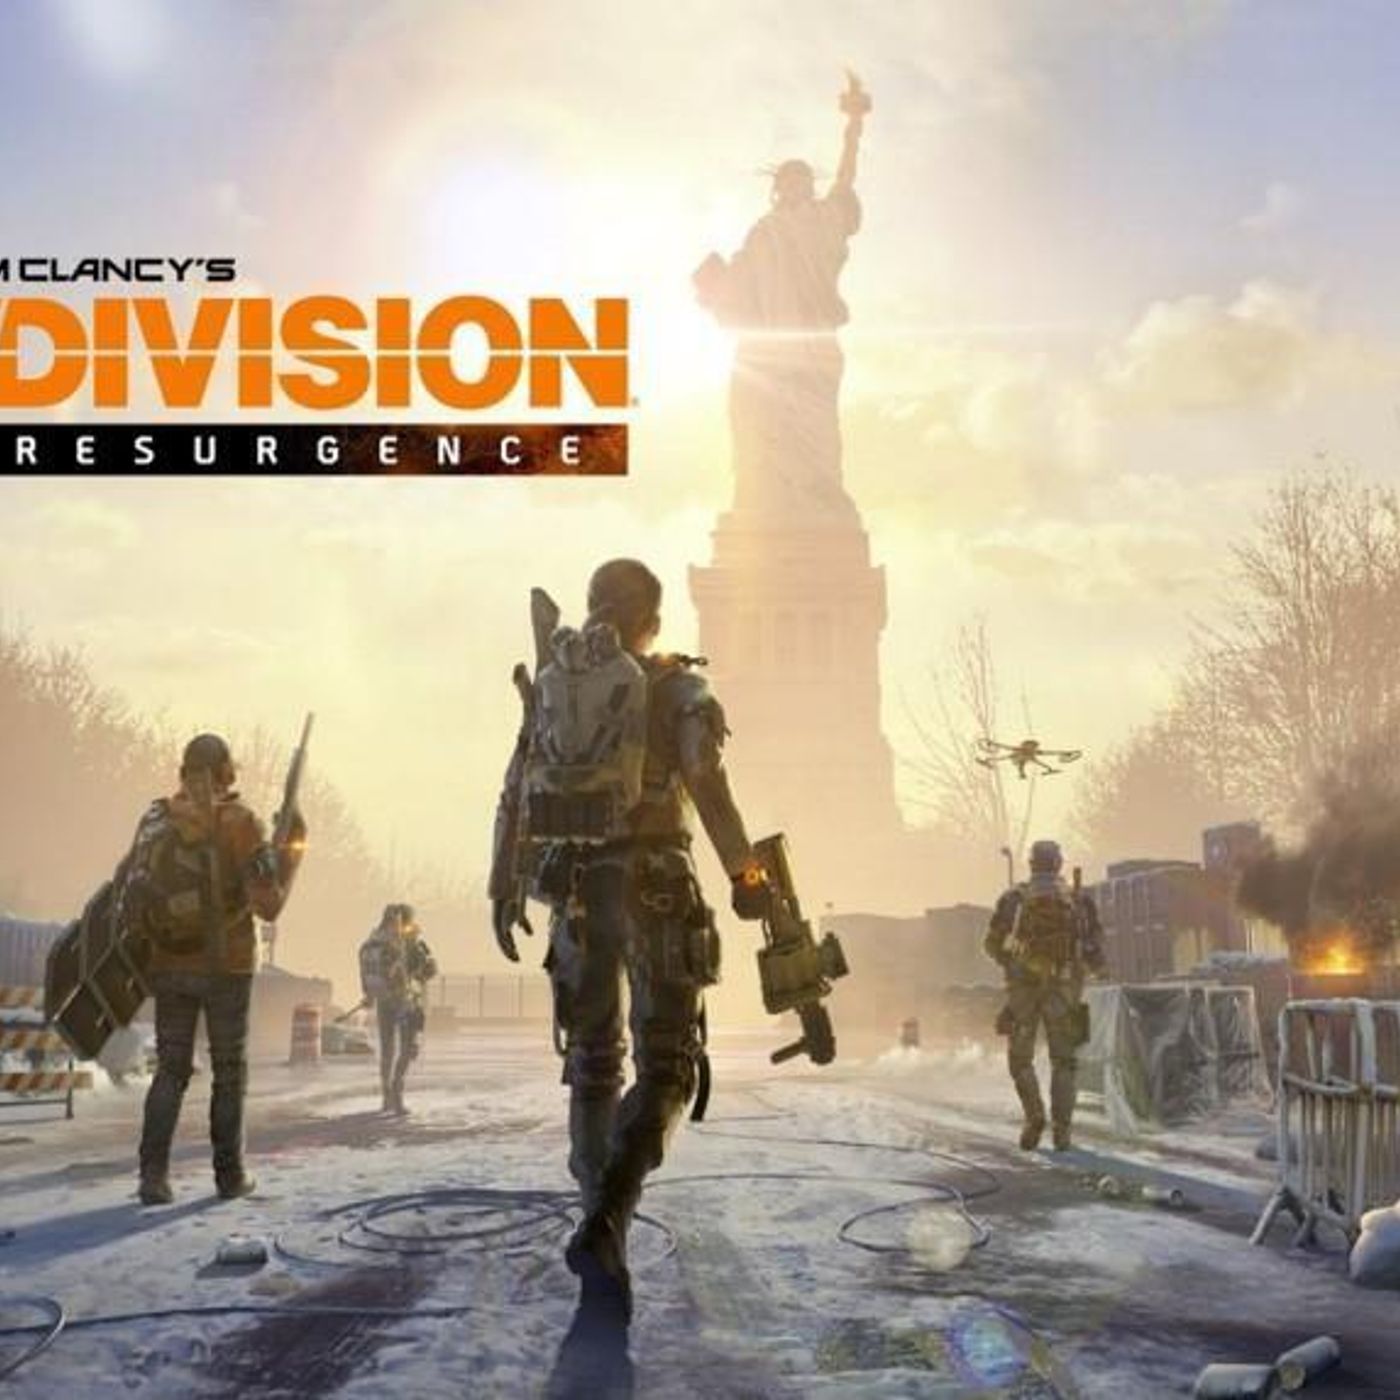 S17 Ep1216: The Division Resurgence Interview and Fan Mail